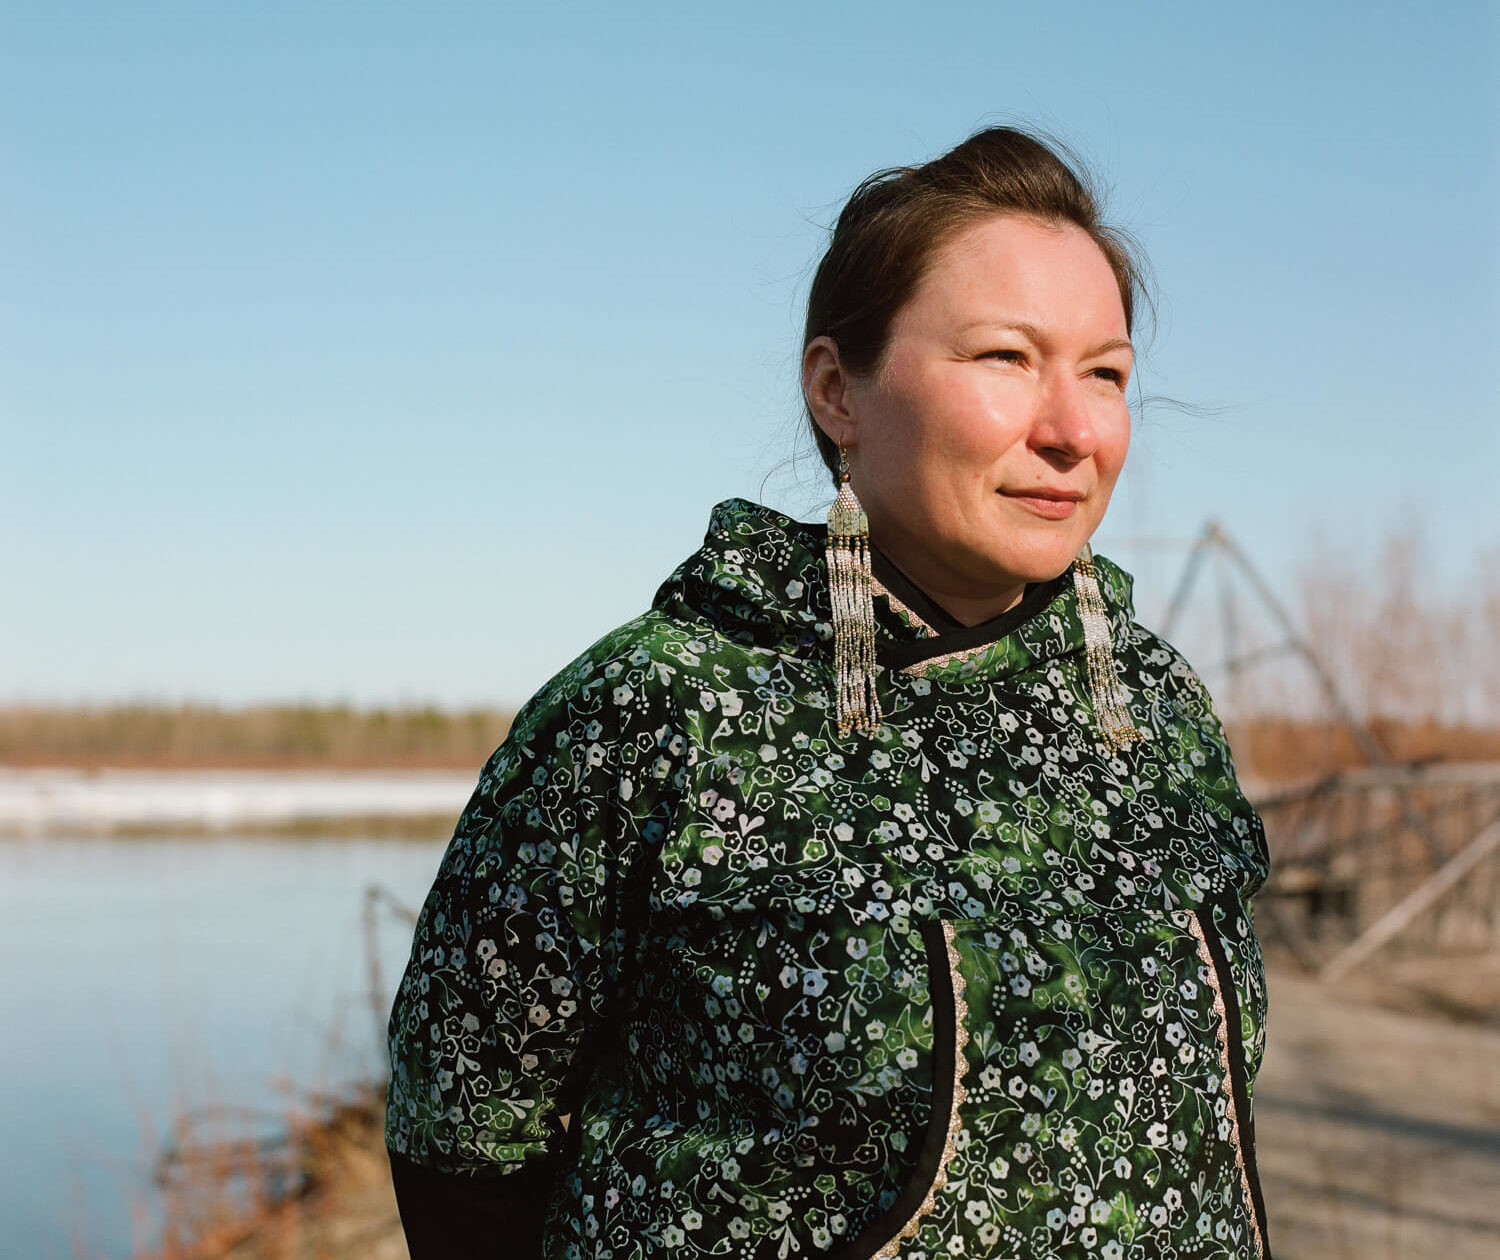 Eva Dawn Burk stands on the bank of the Tanana River in late April in her home village of Nenana, Alaska. Burk is a graduate student at the University of Alaska Fairbanks, who is developing biomass-heated greenhouses for rural Native communities.